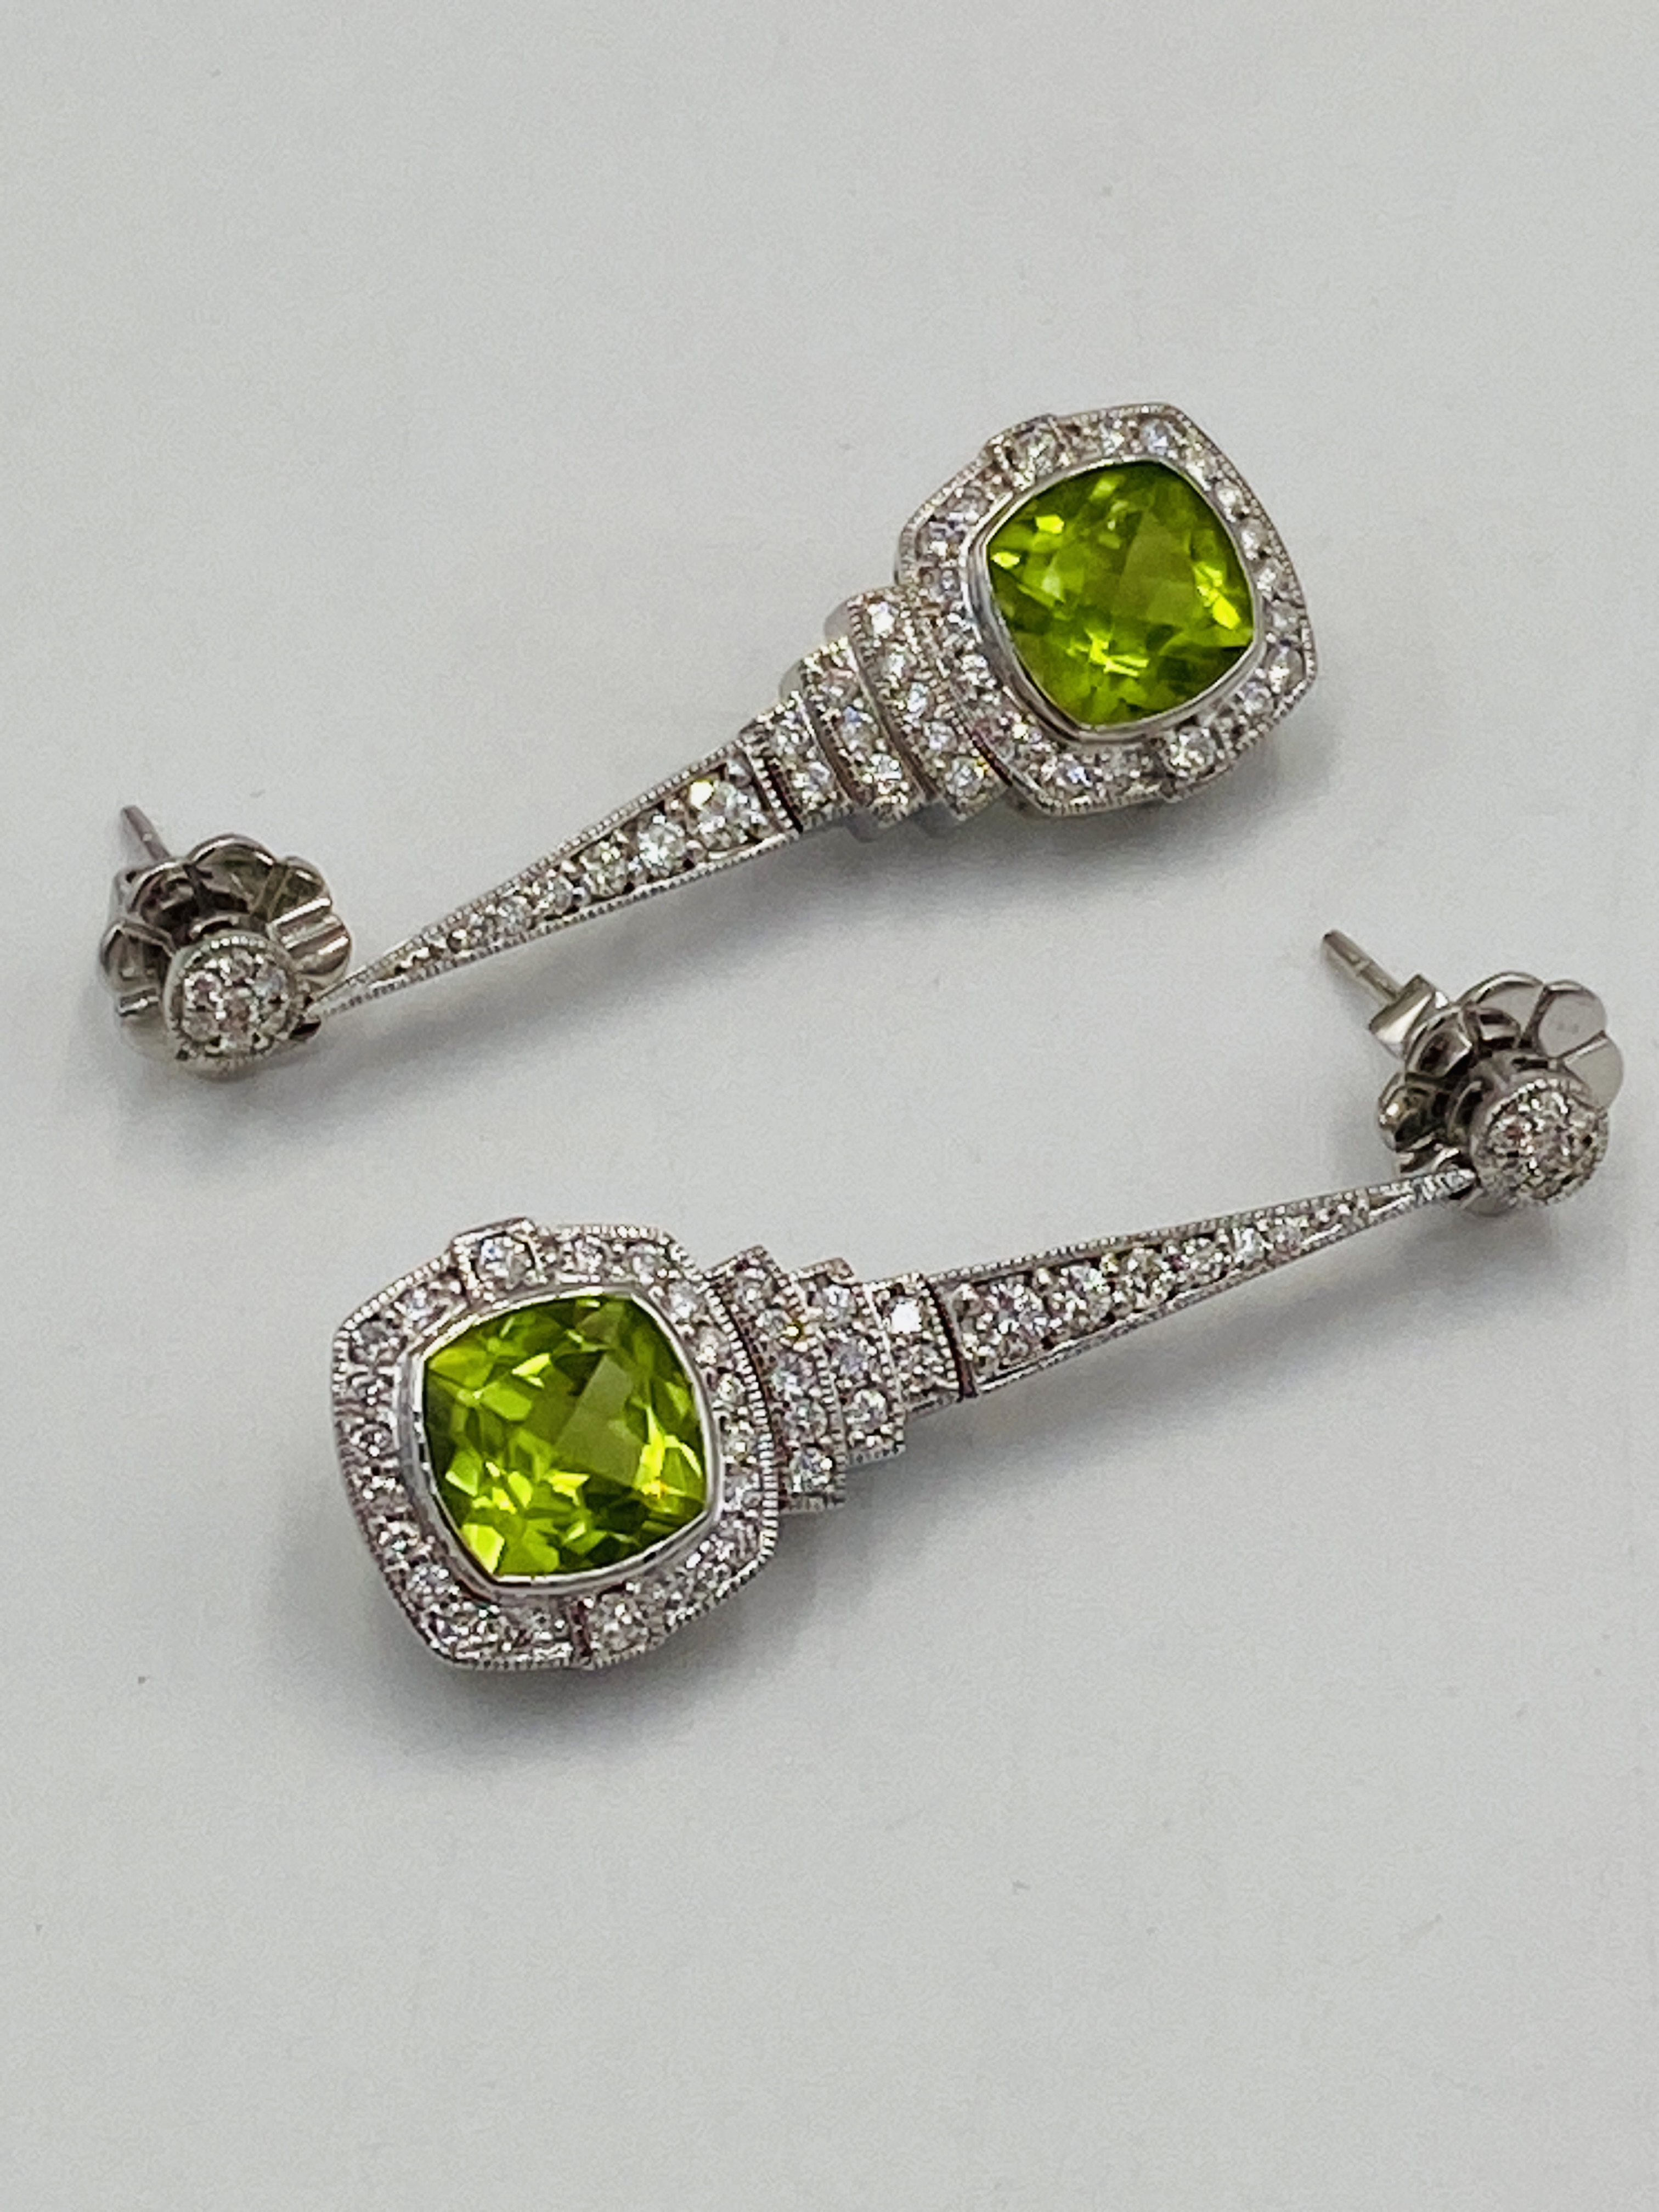 18ct white gold, diamond and green stone drop earrings - Image 8 of 8